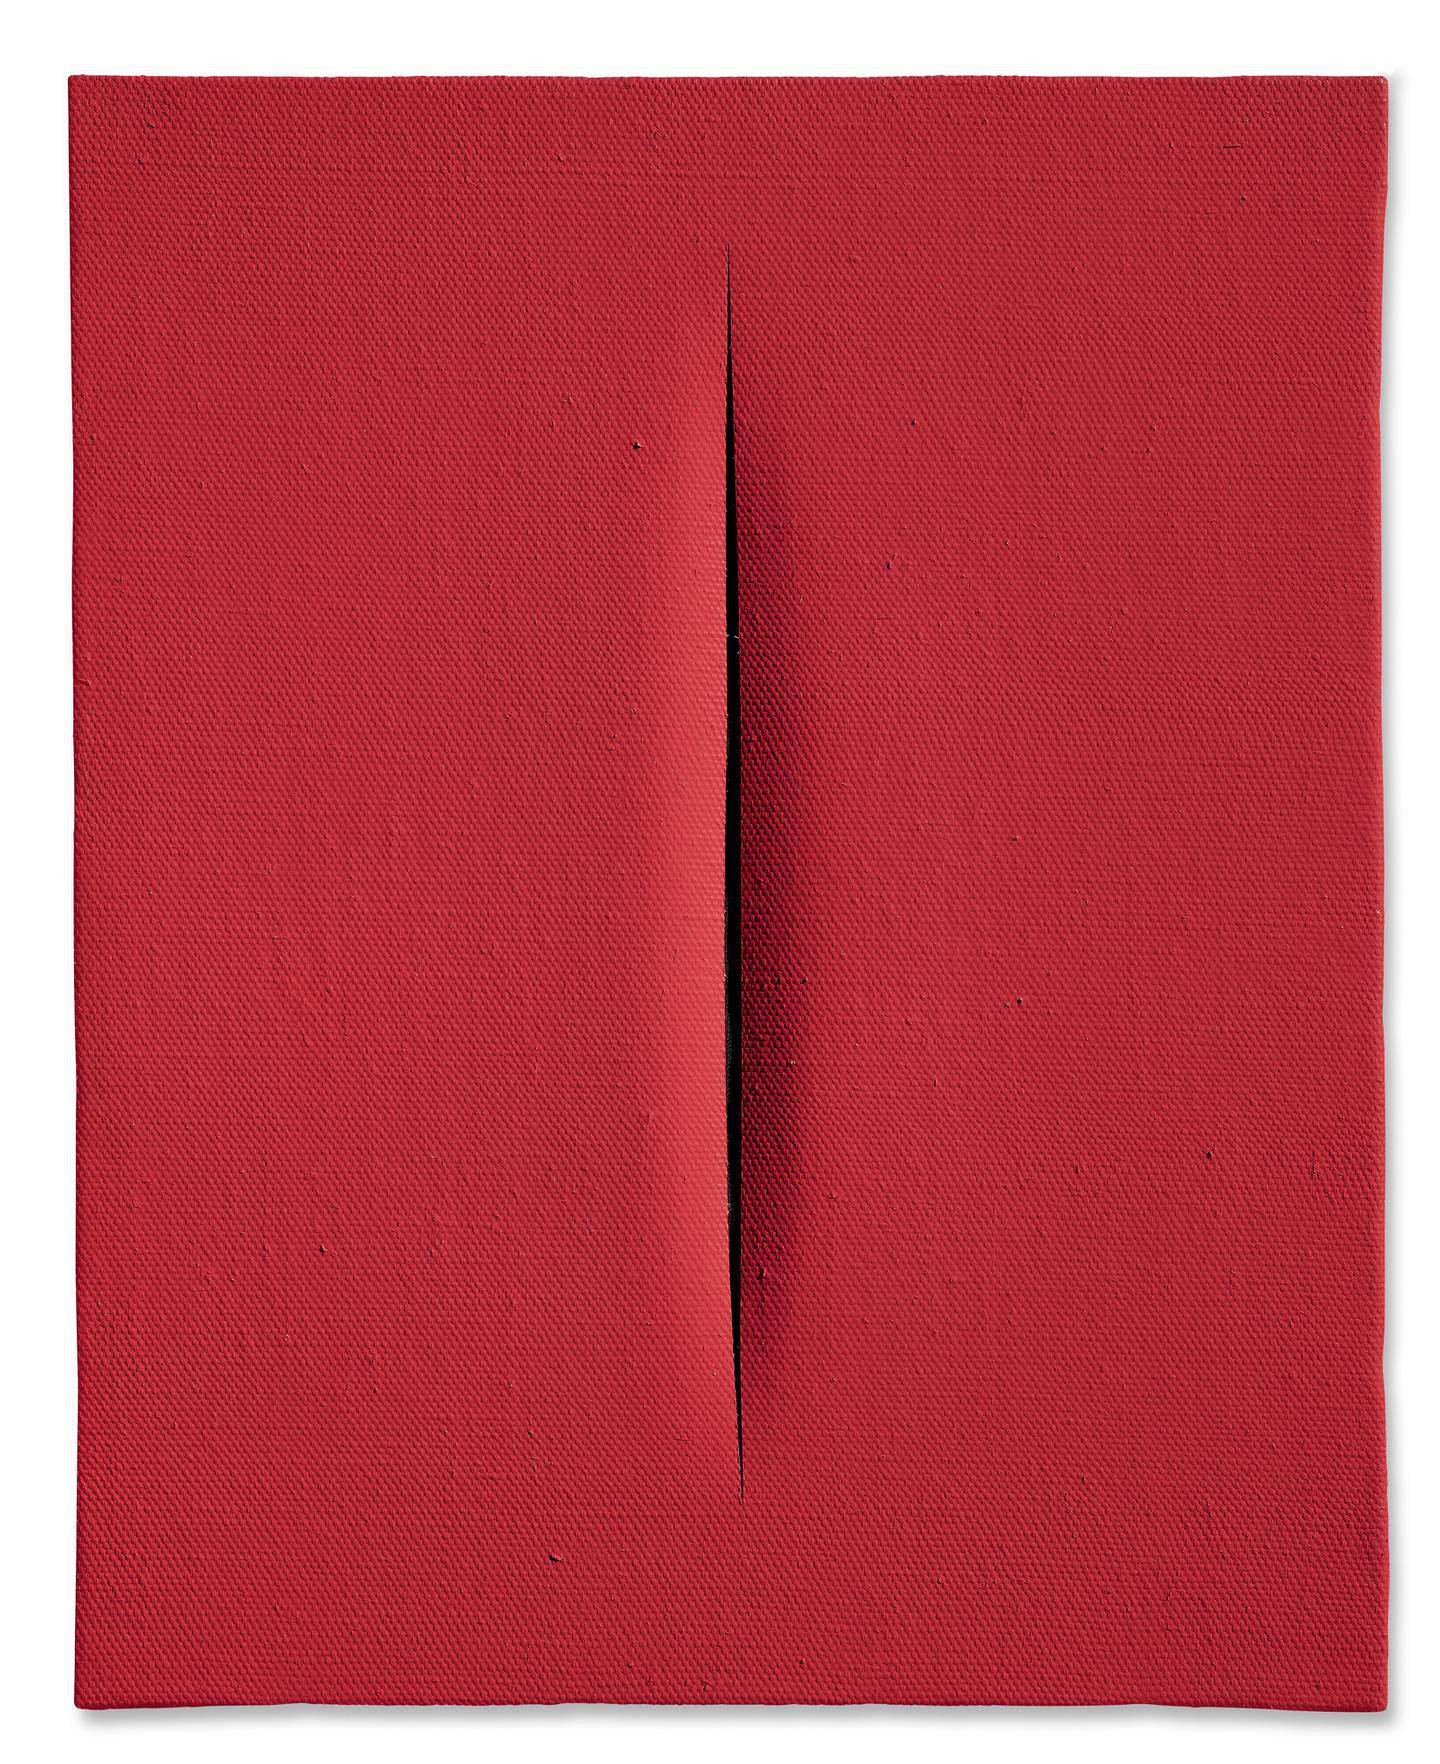 De Sarno cited Milanese references like Lucio Fontana in a book accompanying his 'Ancora' collection.